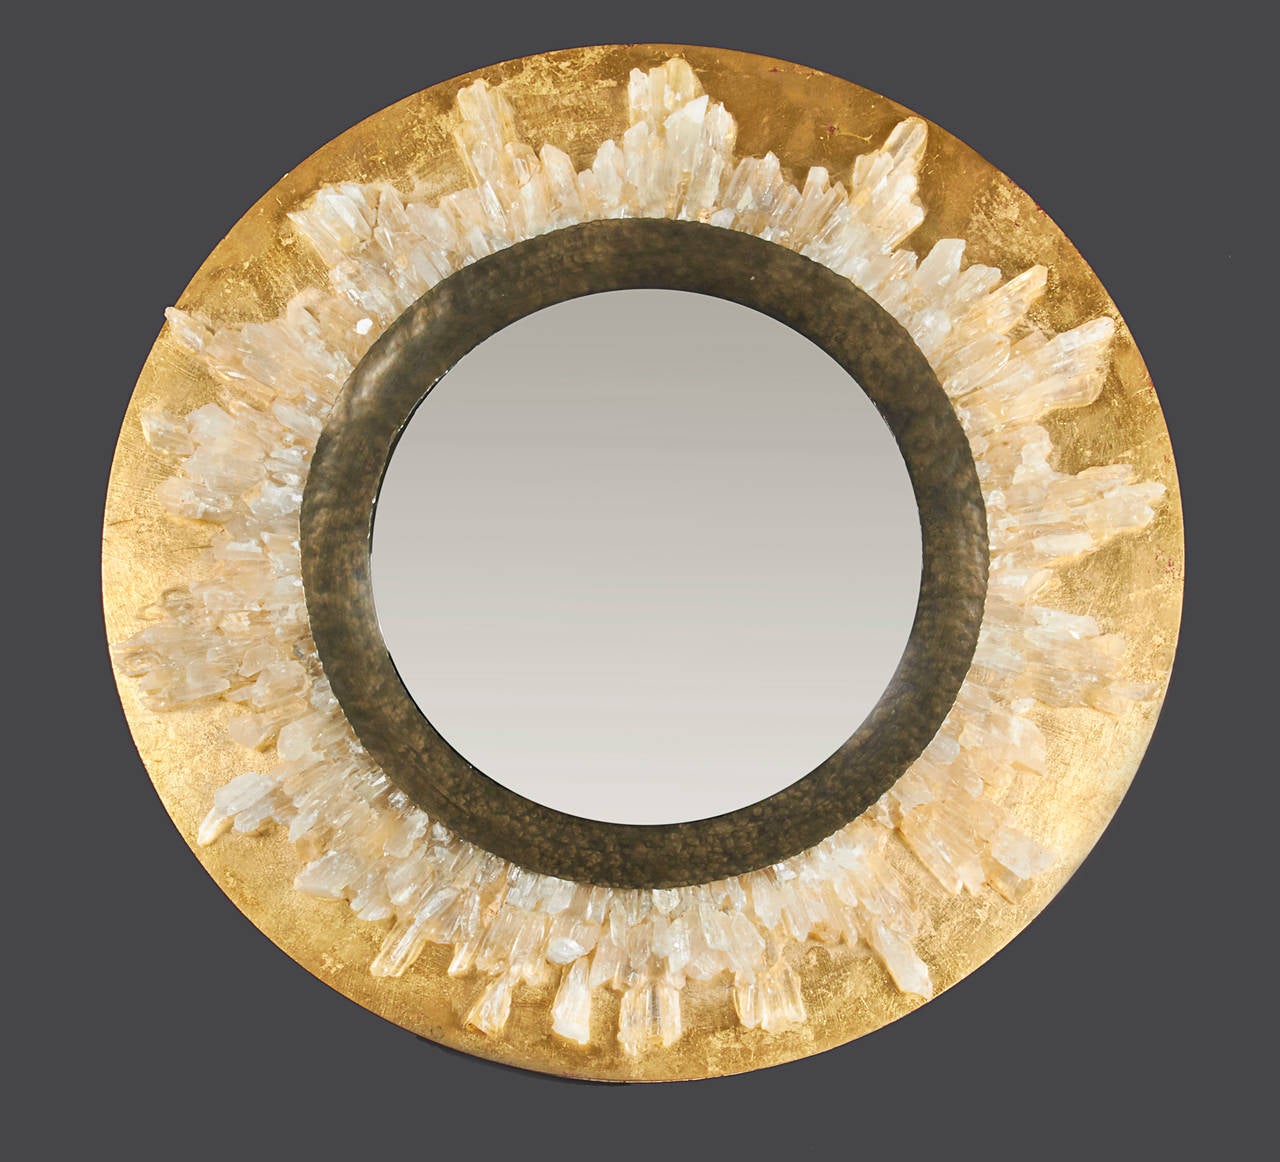 In the style of Goossens Paris, this mirror is embellished with Crystals arranged around a Bronze band with a Giltwood base. Wall jewelry to enhance any space.